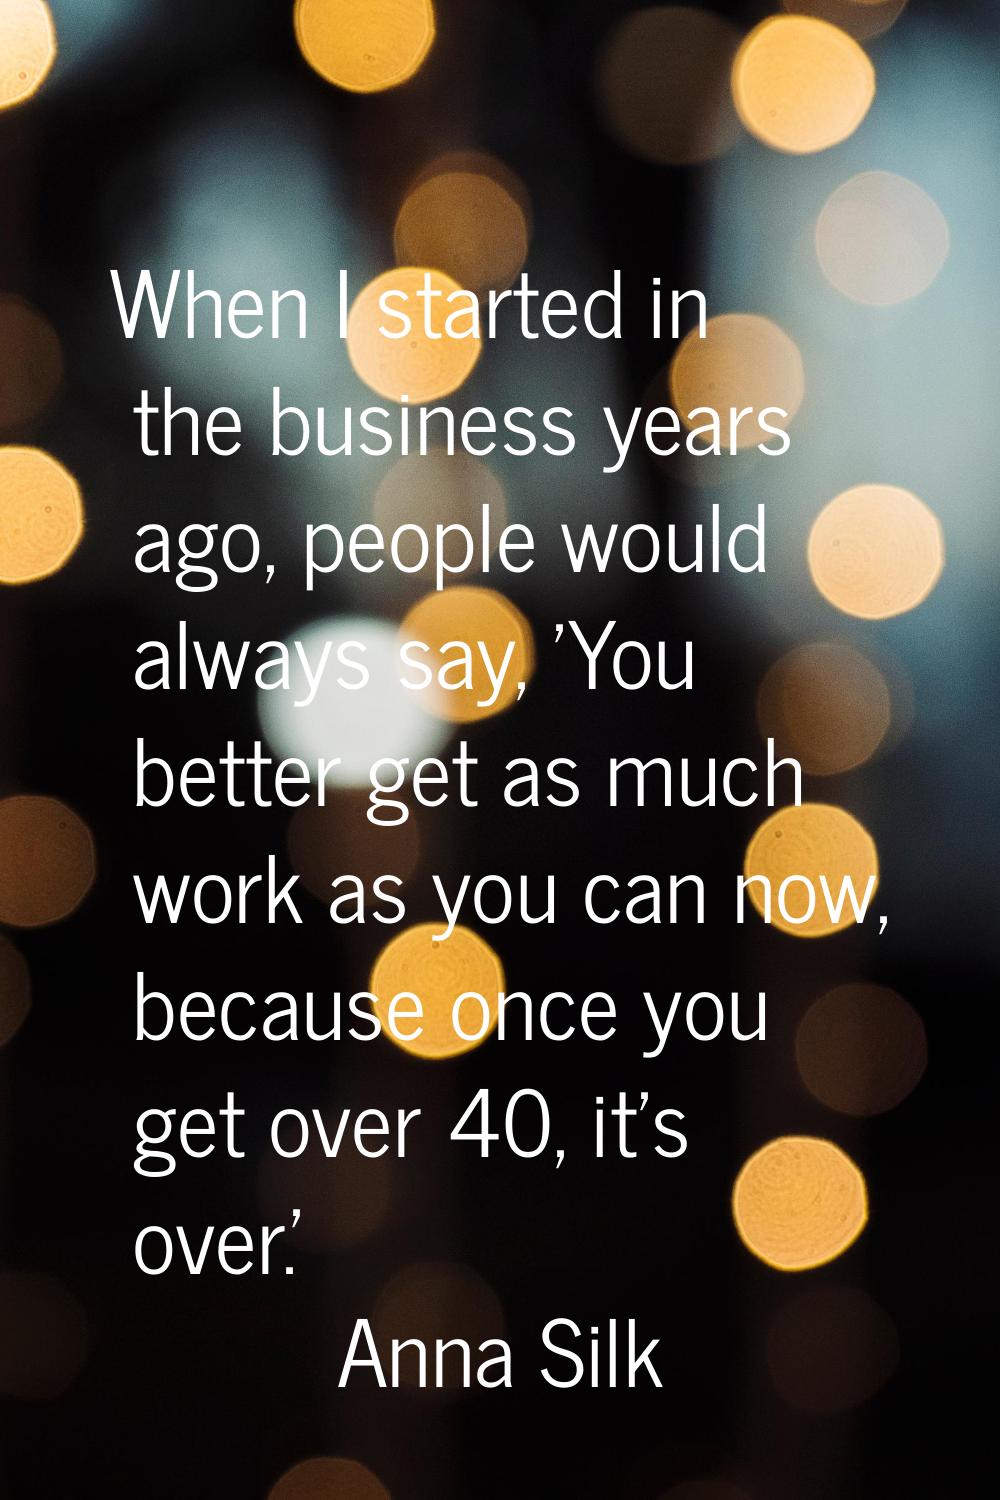 When I started in the business years ago, people would always say, 'You better get as much work as 